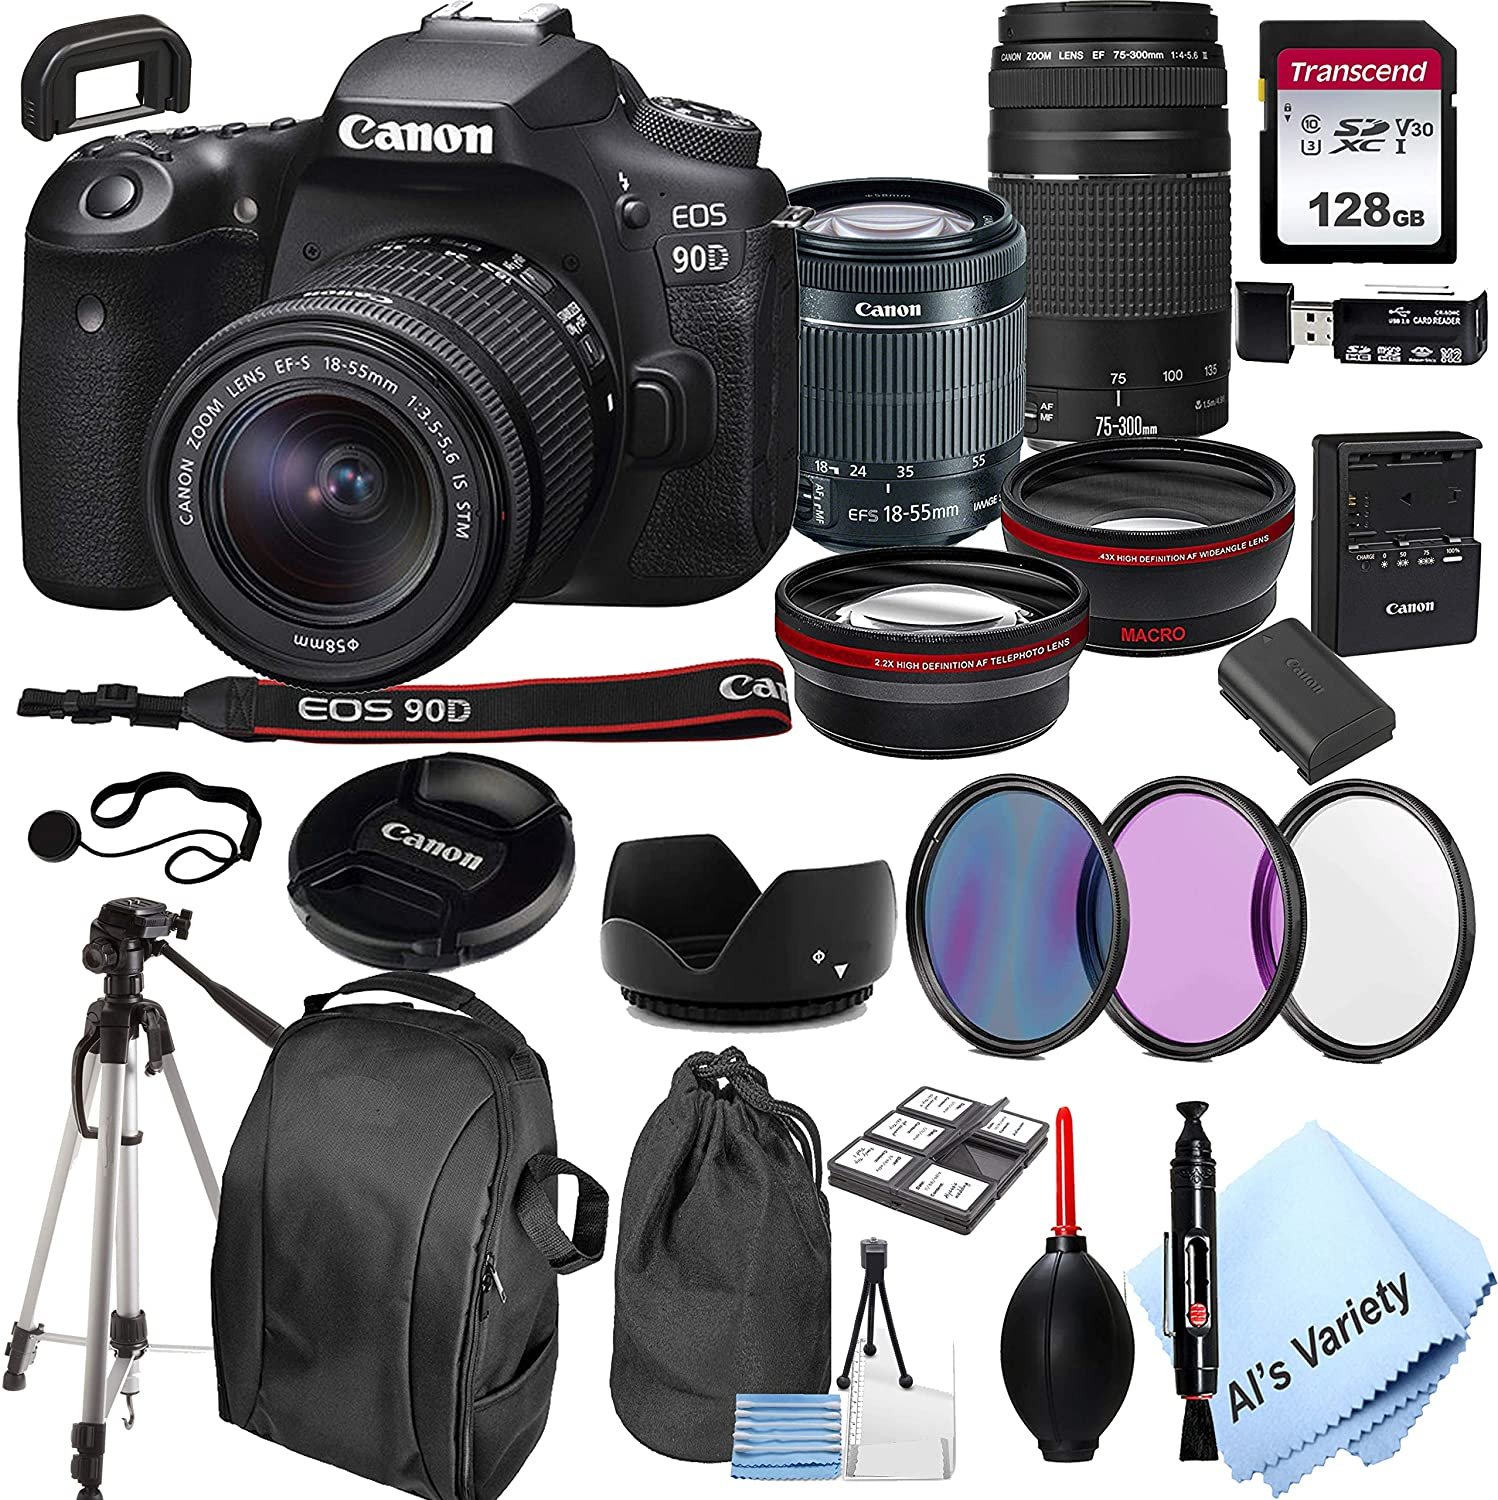 Canon EOS 90D DSLR Camera + 18-55mm f/3.5-5.6 is STM Lens + 75-300mm F/4-5.6 III Lens + 128GB Card, Tripod,Back-Pack,Filters, 2X Telephoto Lens, - image 1 of 8